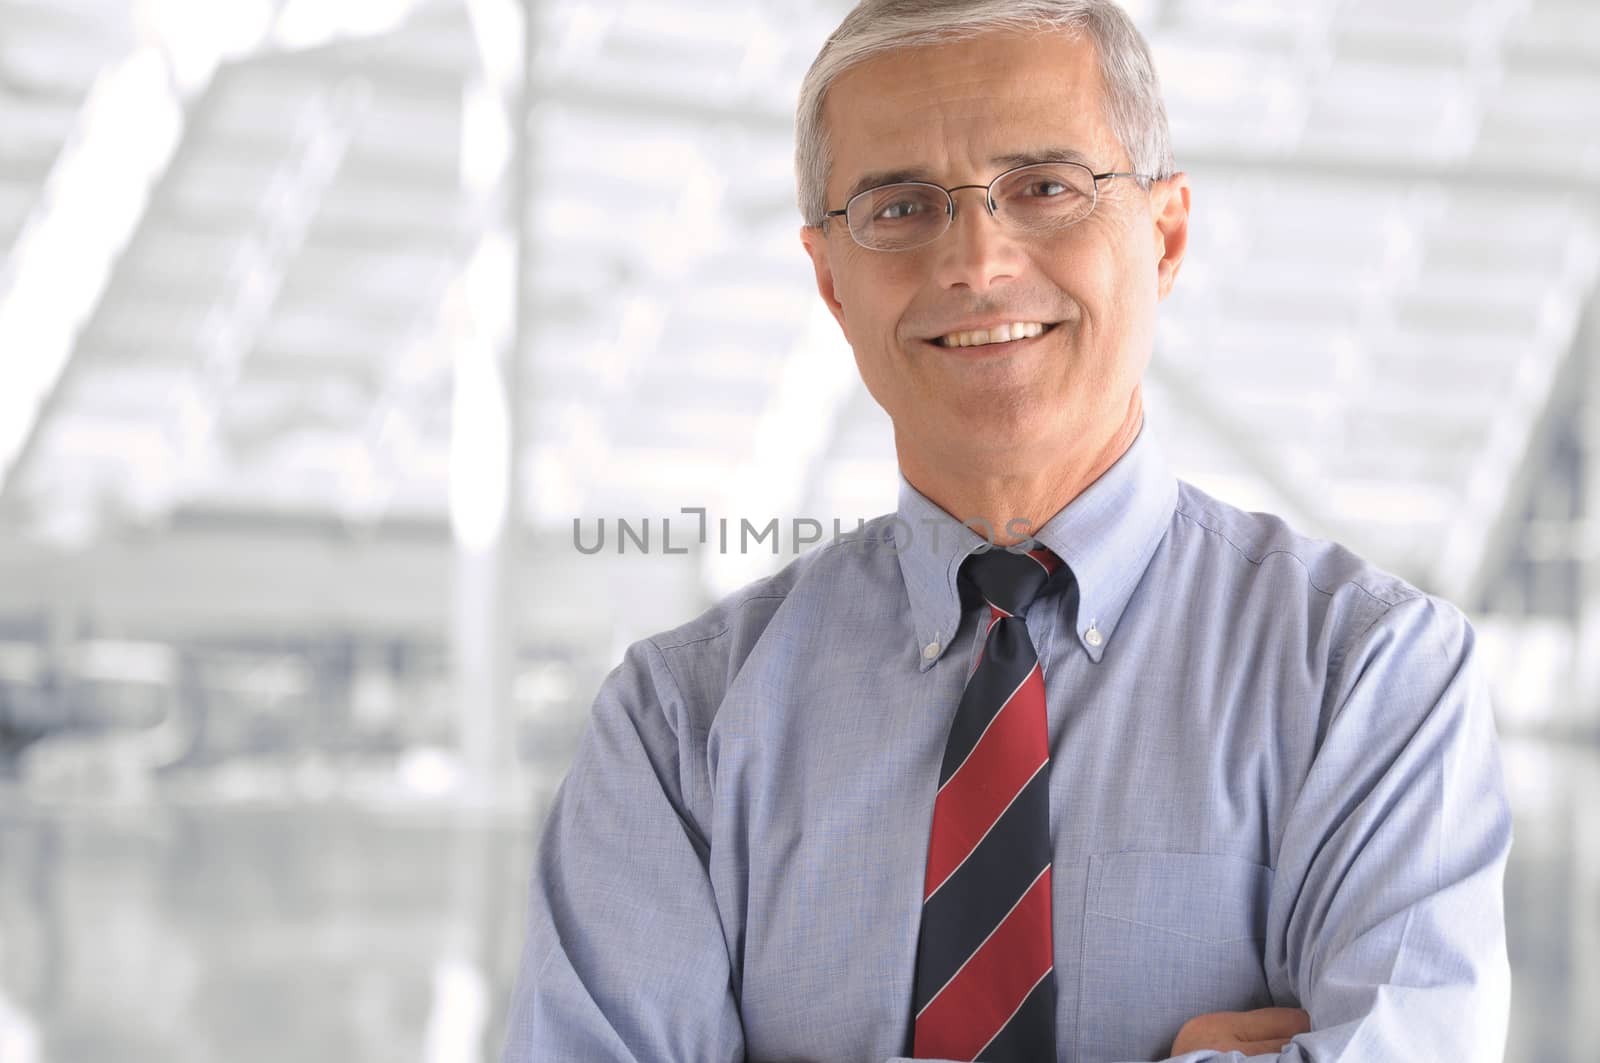 Business man portrait in modern office building. Middle aged man is smiling at the camera and has his arms folded. Closeup head and shoulders only.